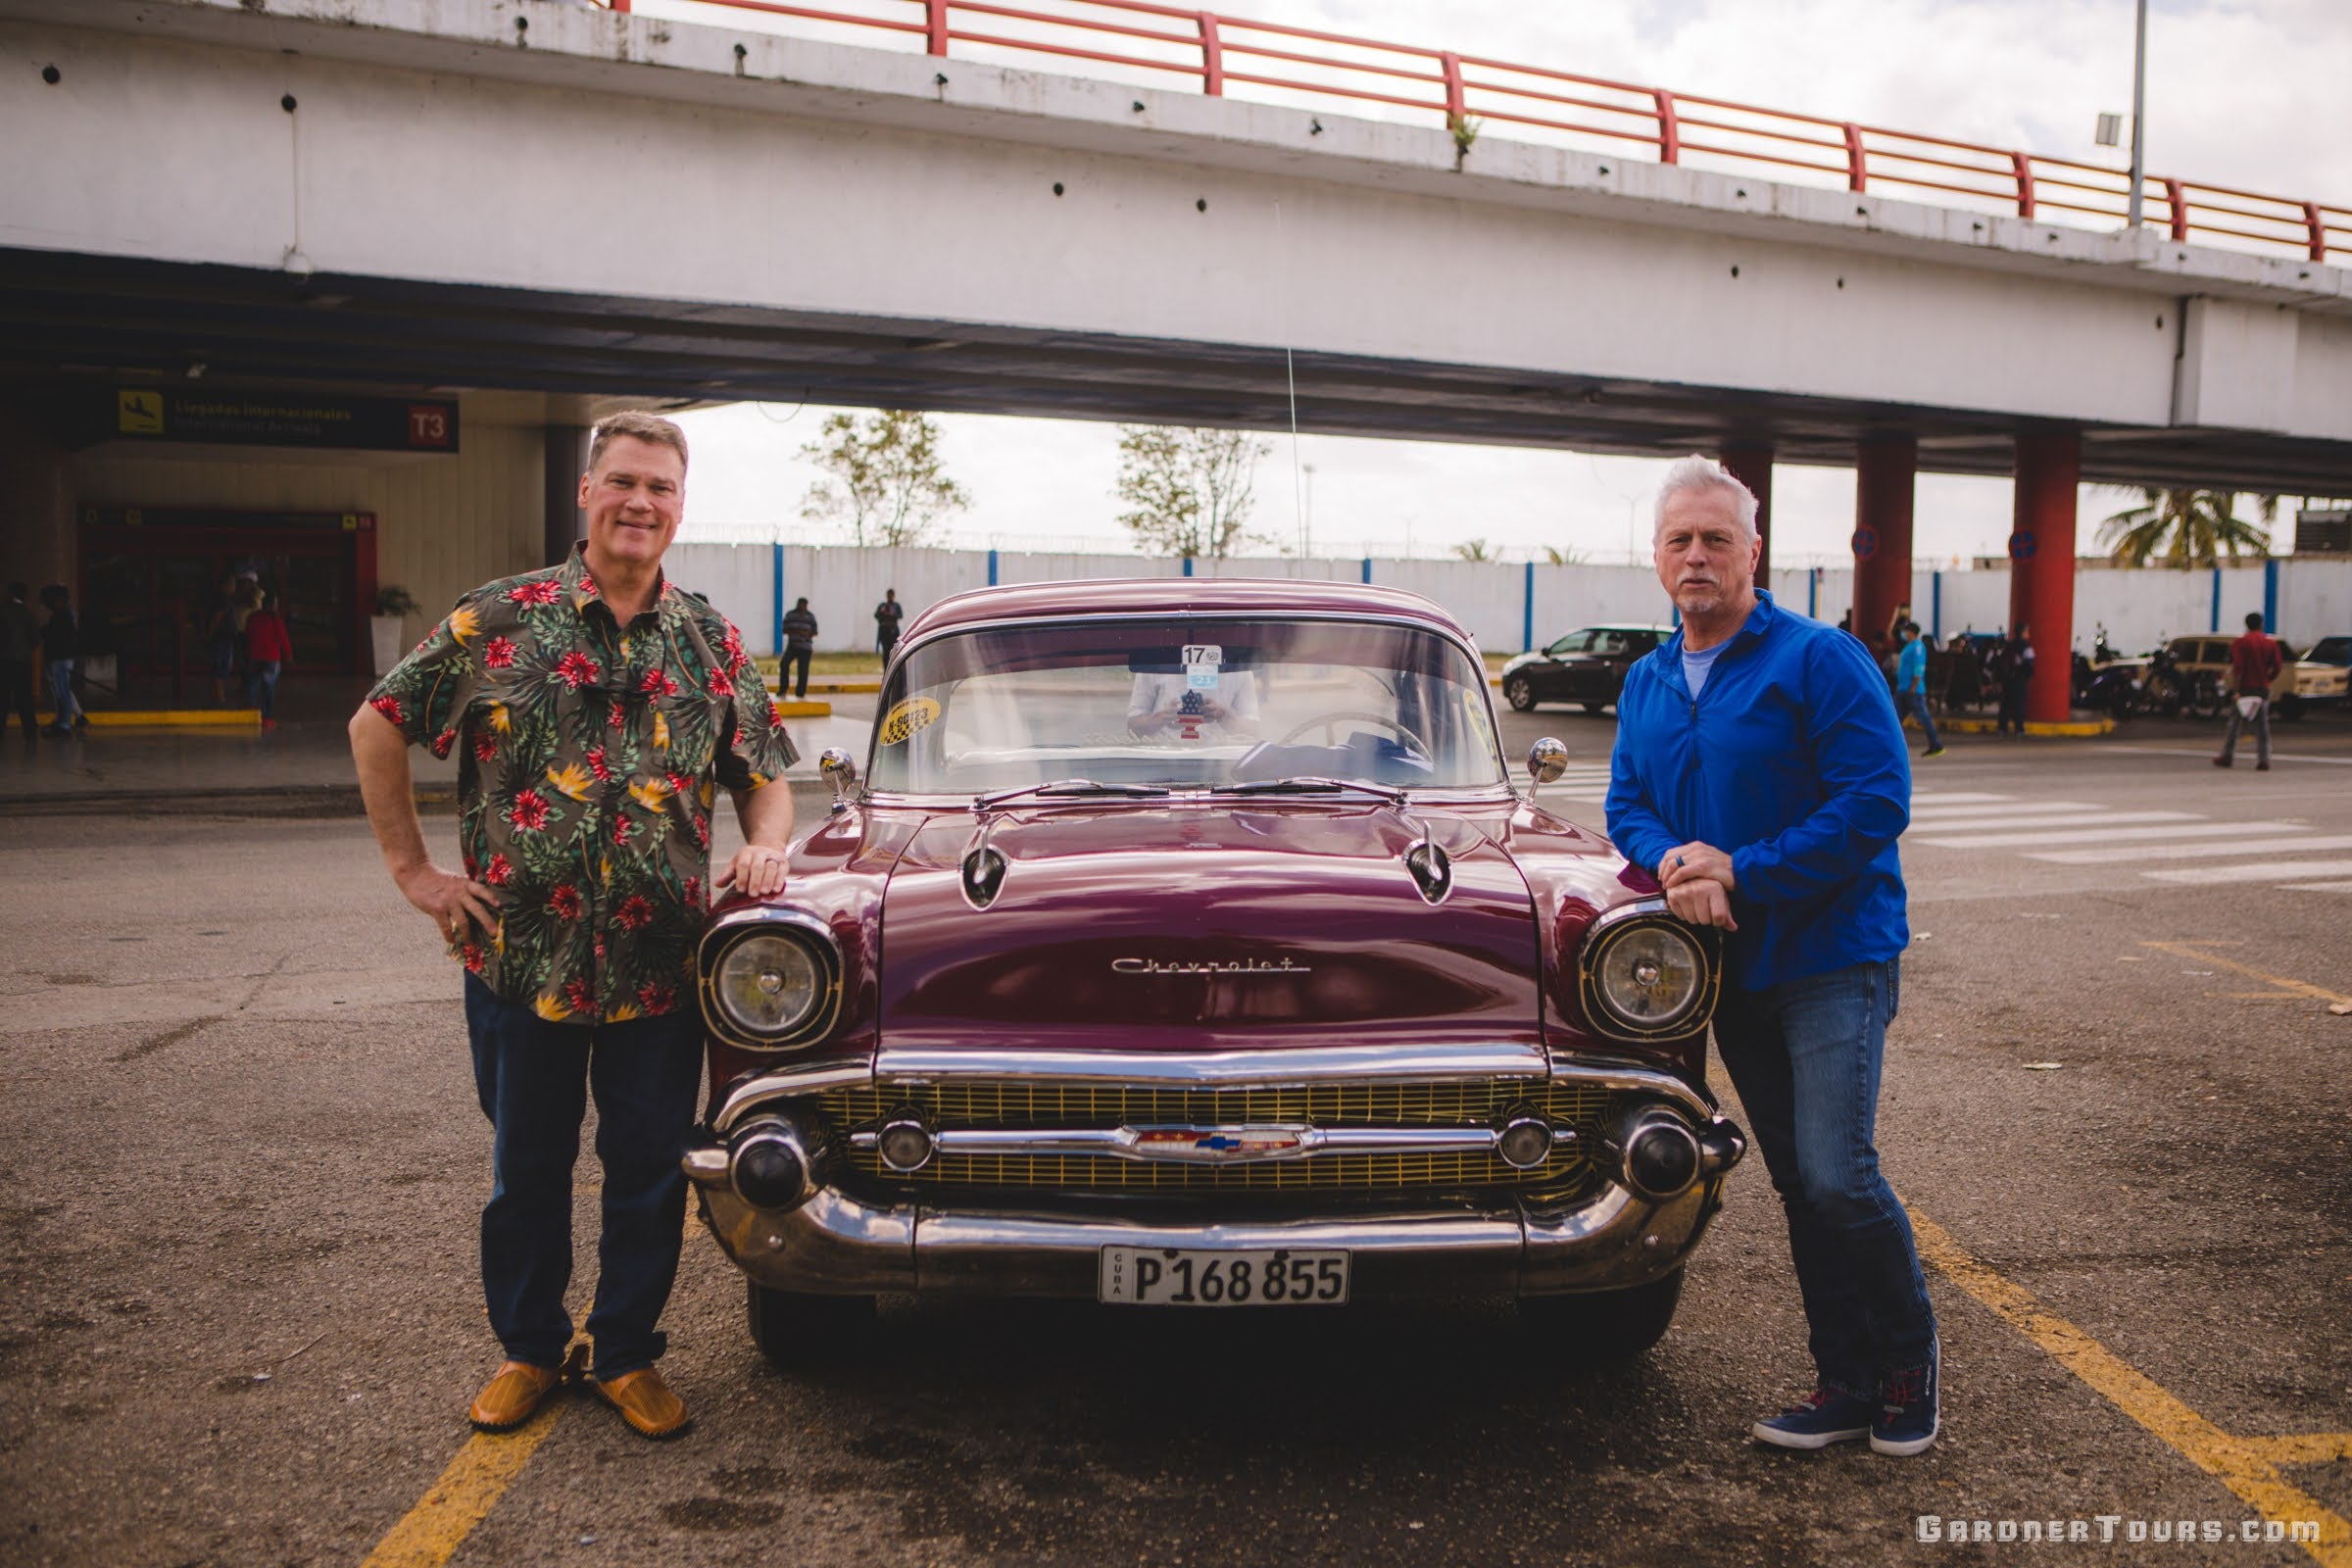 Two American Travelers to Cuba standing by of a Maroon 1957 Chevrolet Bel Air in front of the José Martí International Airport in Havana Cuba